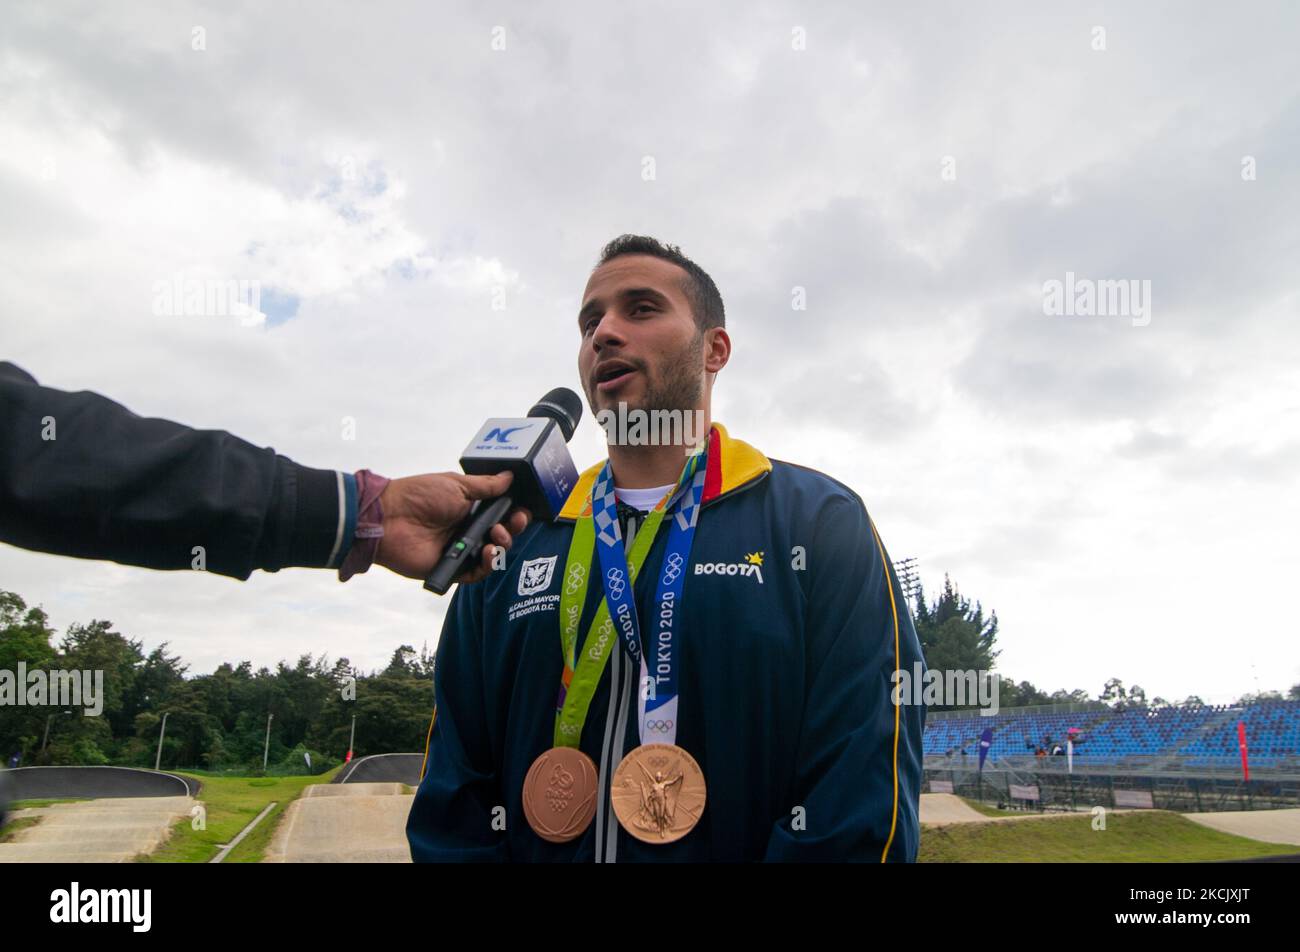 Carlos Ramirez talks live to the press during the name inauguration of the Carlos Ramirez BMX track named after Carlos Ramirez bronze Olympic Medal winner during the Tokyo 2020+1 Olympics, in Bogota, Colombia, on August 18, 2021. (Photo by Sebastian Barros/NurPhoto) Stock Photo